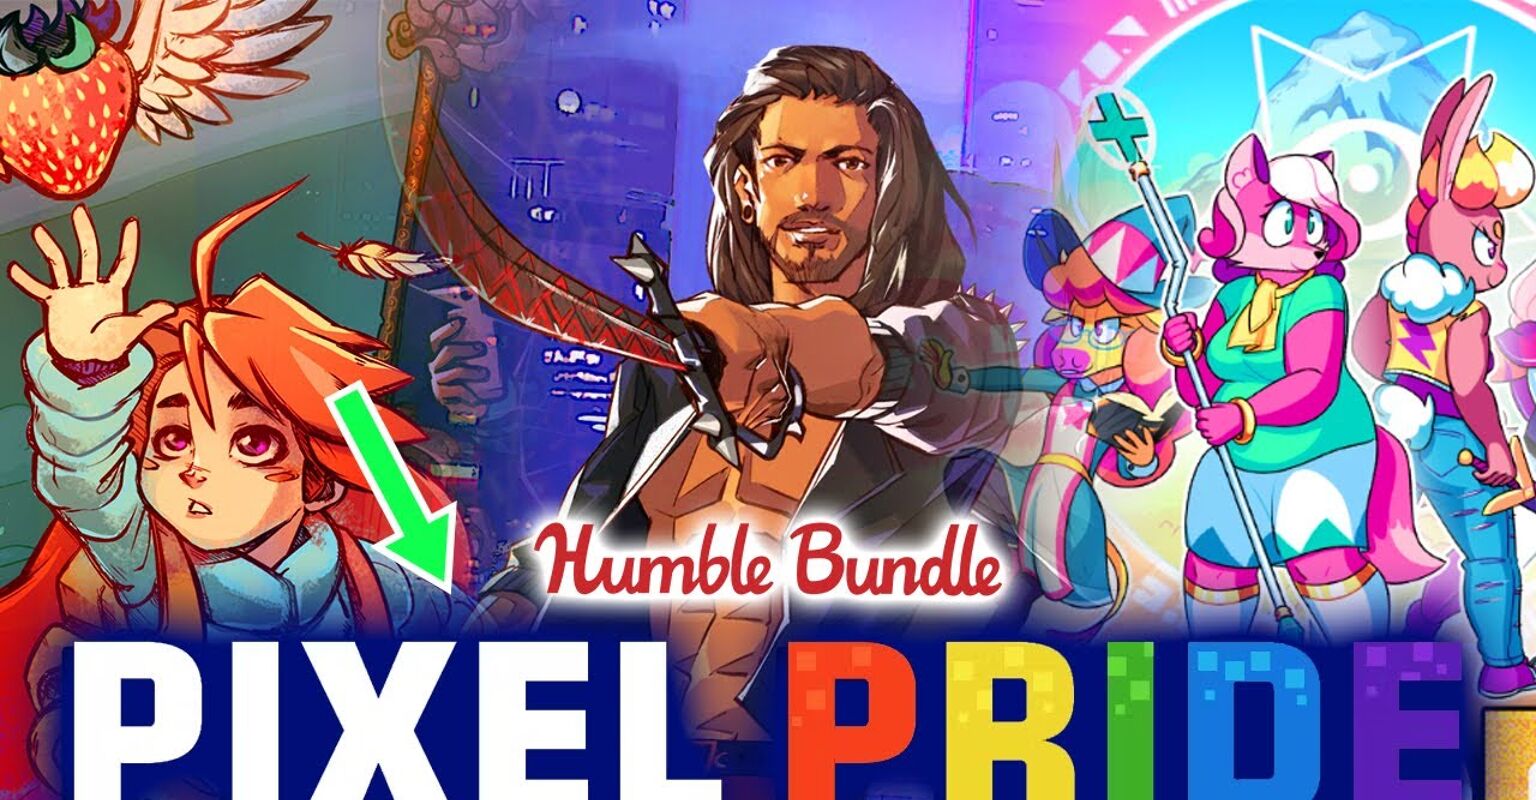 Humble Bundle stops purchasers from giving full payment to charity